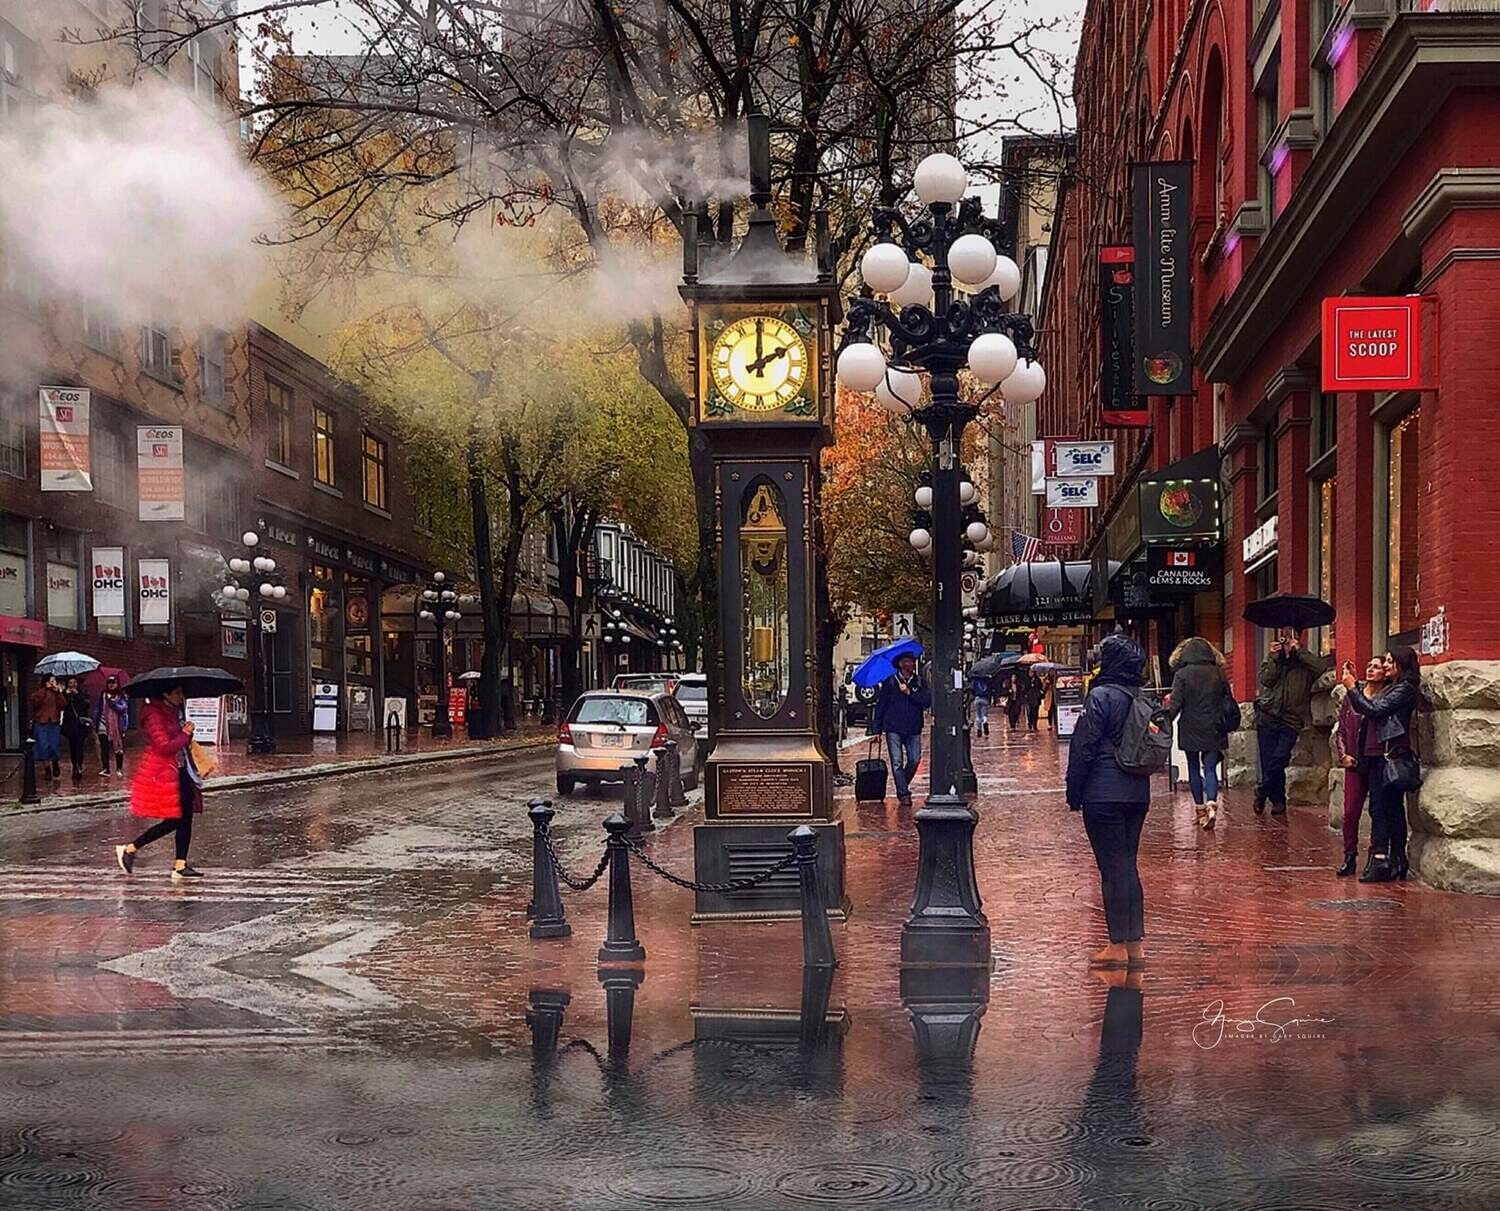 A Rainy Day in Vancouver